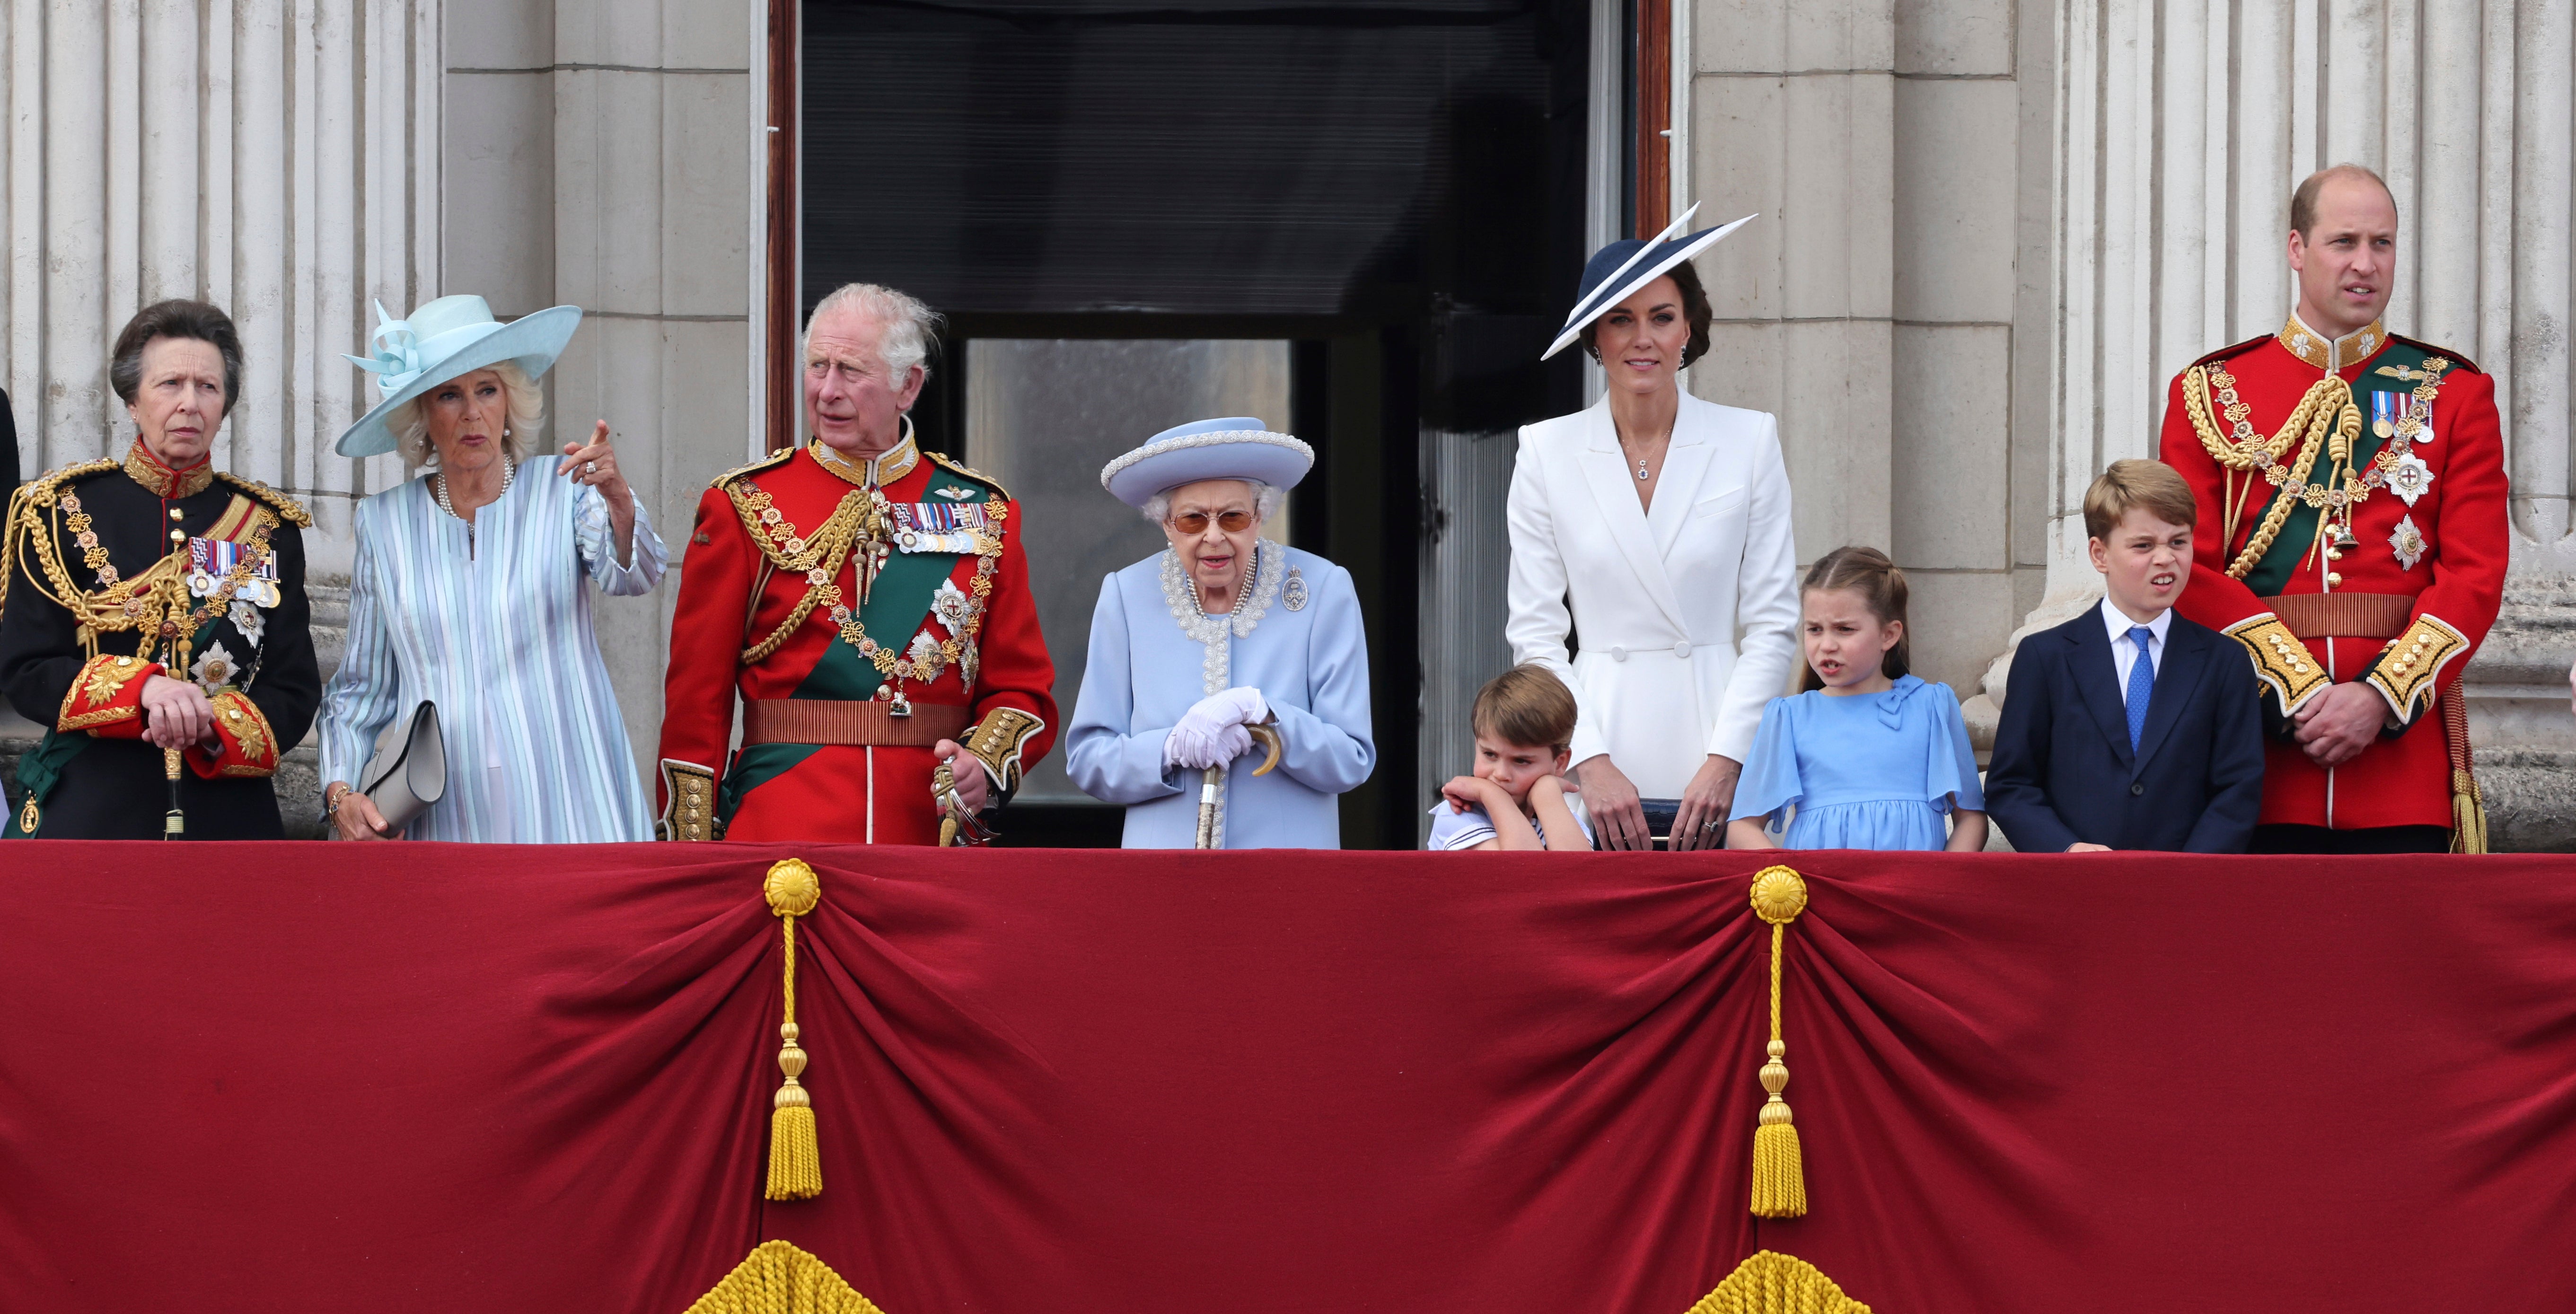 The Queen alongside Princess Anne, Camilla, Charles, , Louis, Kate, Charlotte, Louis and William watch the Trooping of the Color in London